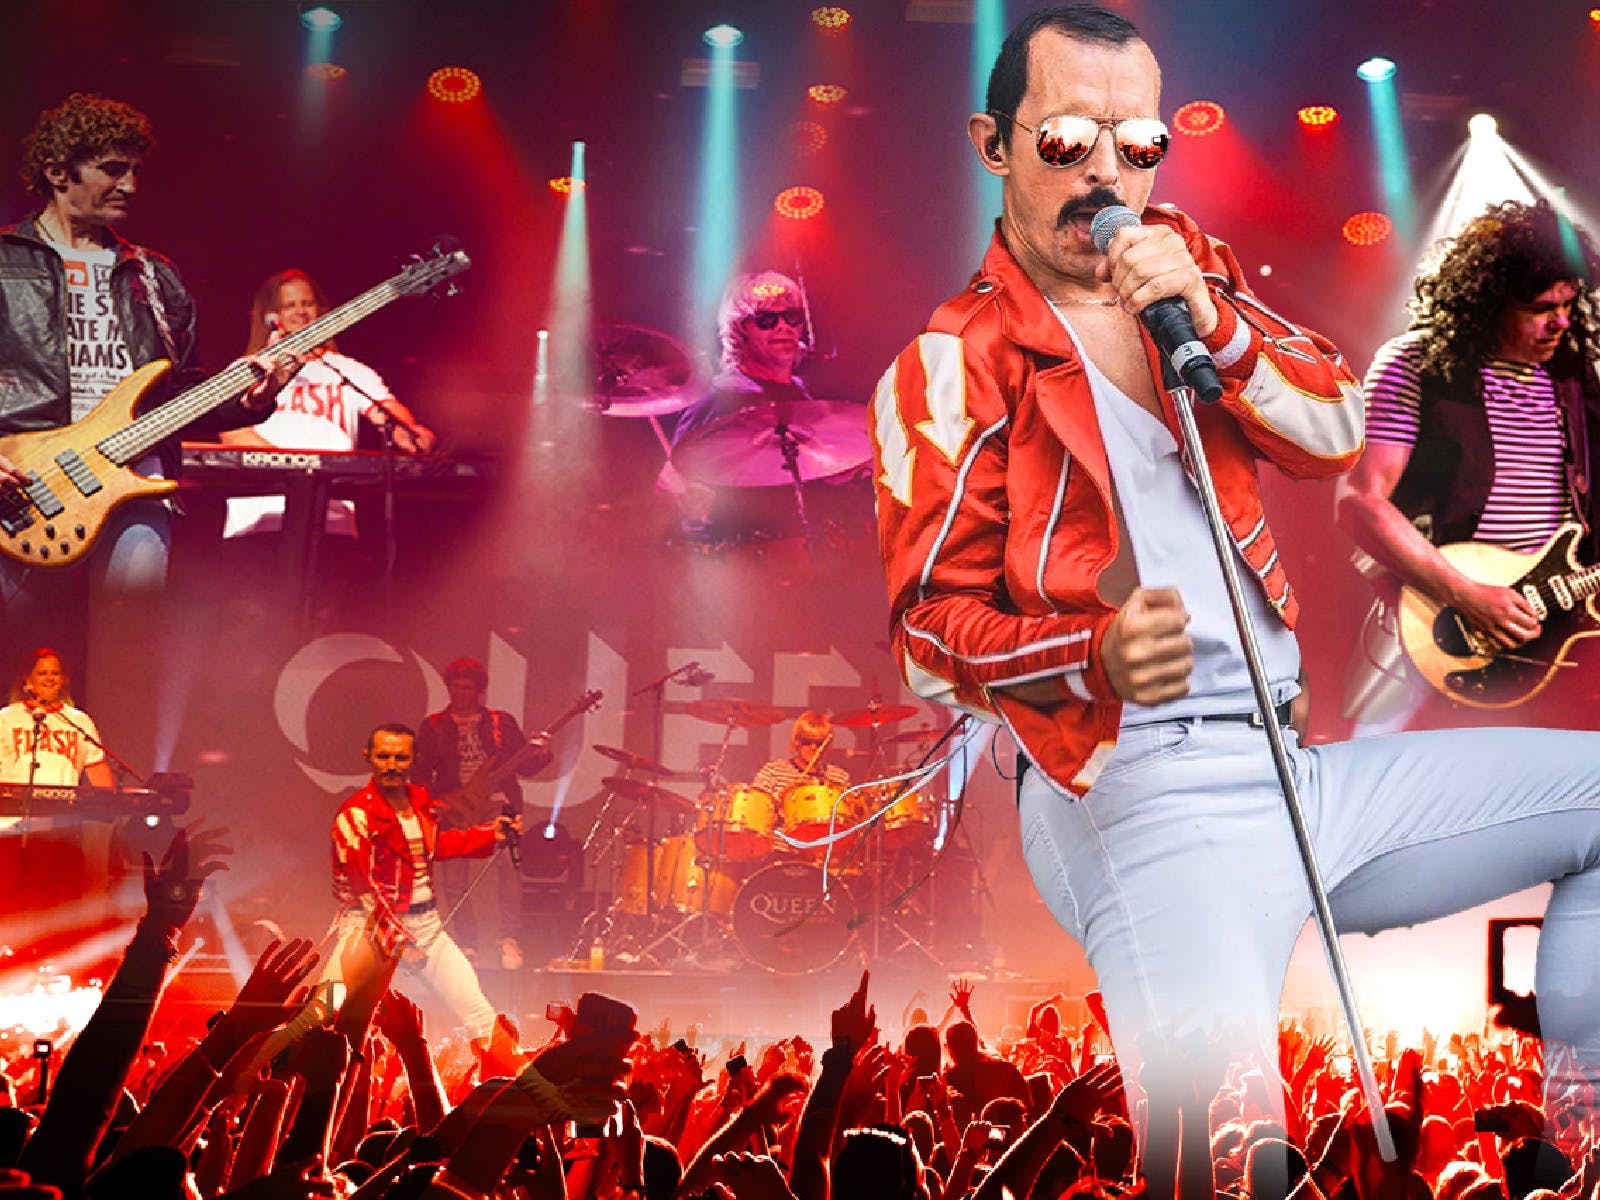 What Is Bohemian Rhapsody About? - Queen Forever